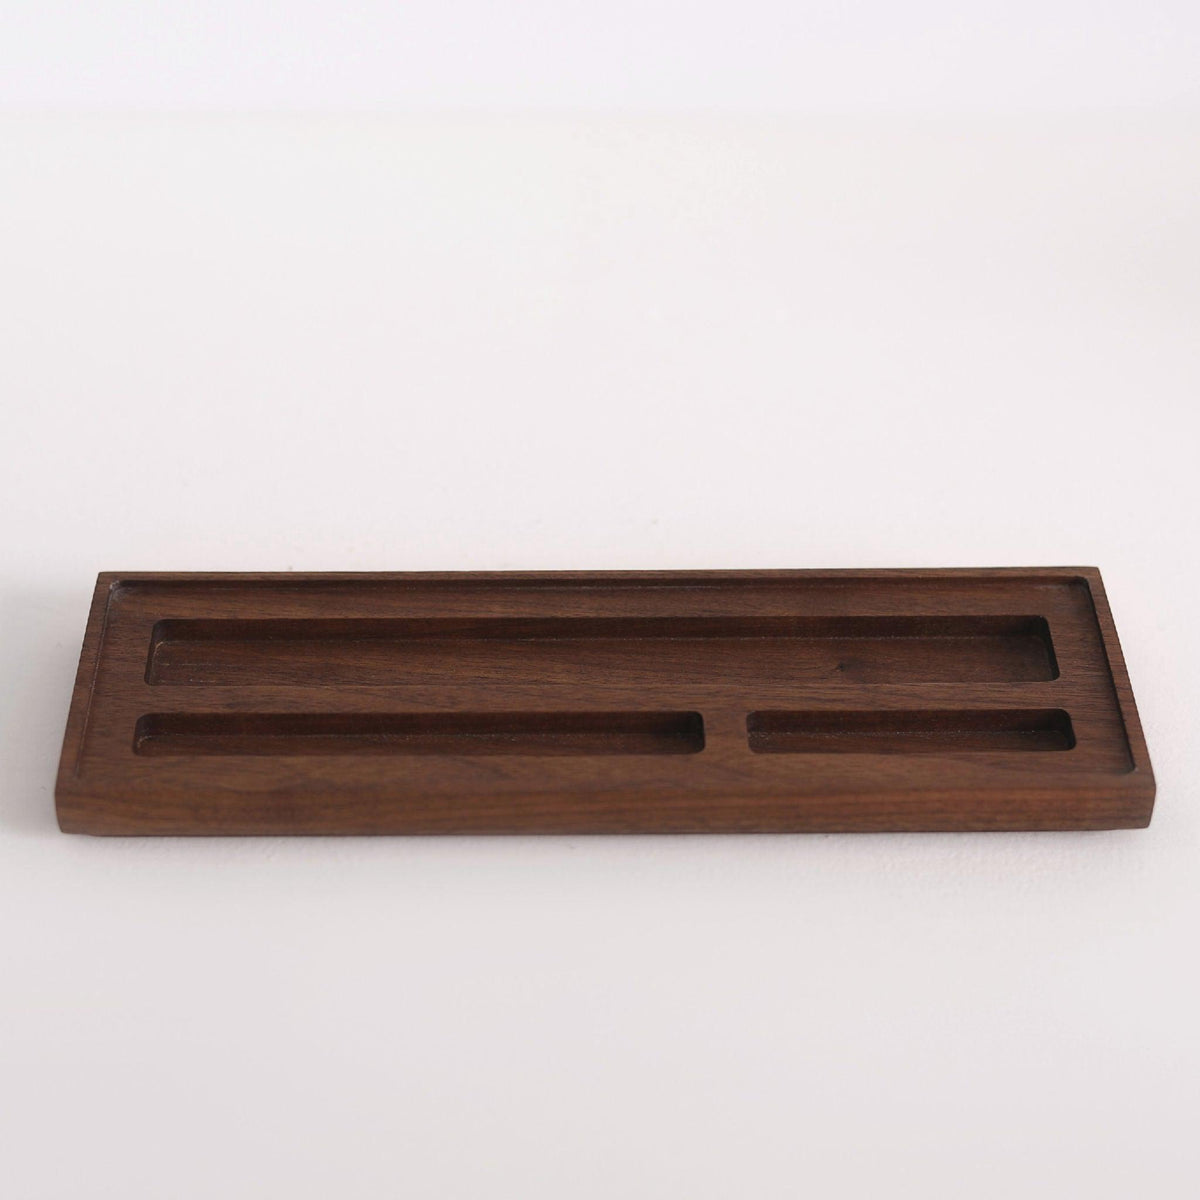 Walnut wooden base for incense burners by Kin Objects